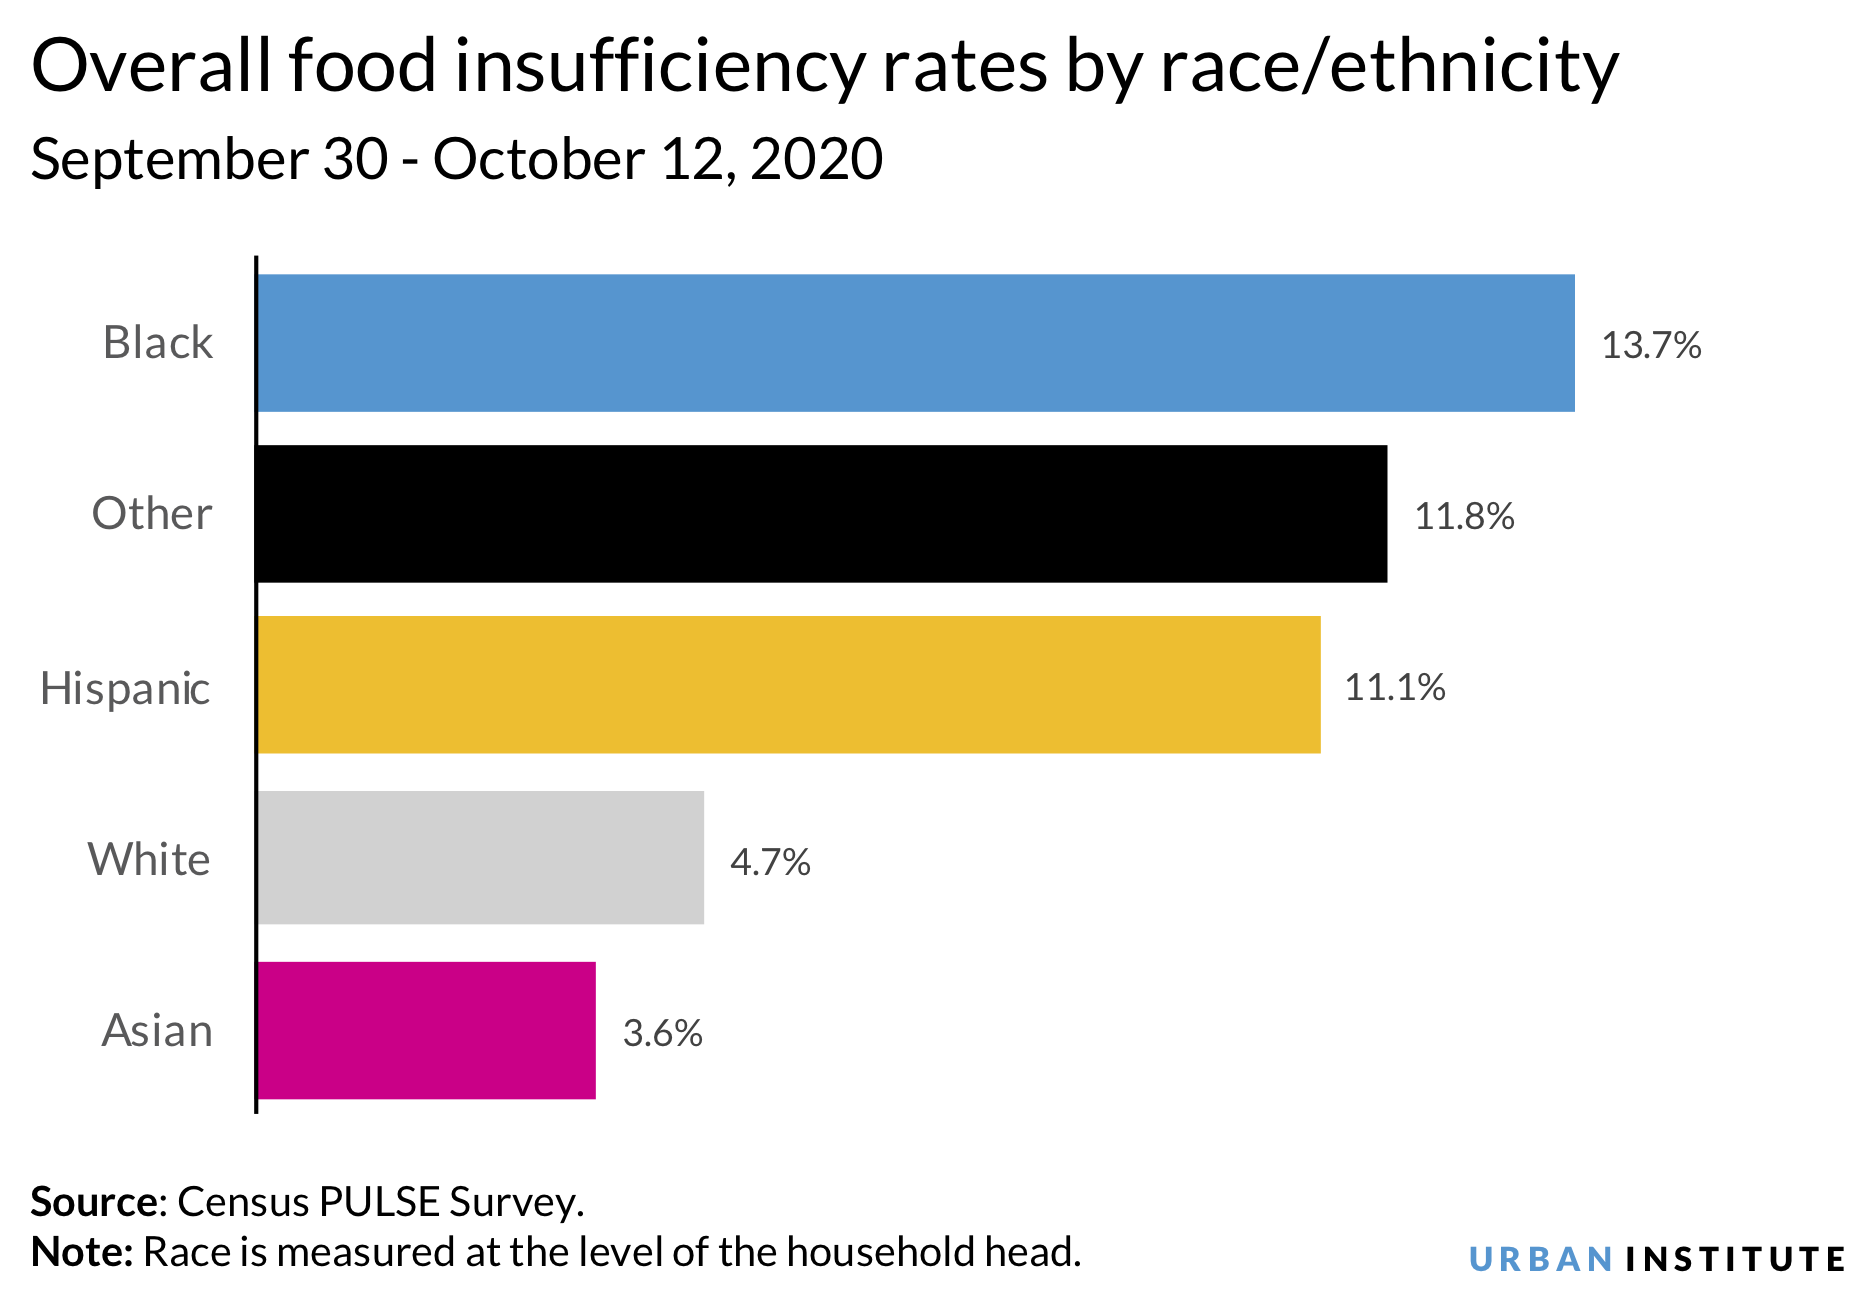 Food insufficiency rates by race/ethnicity from September 30 to October 12, 2020